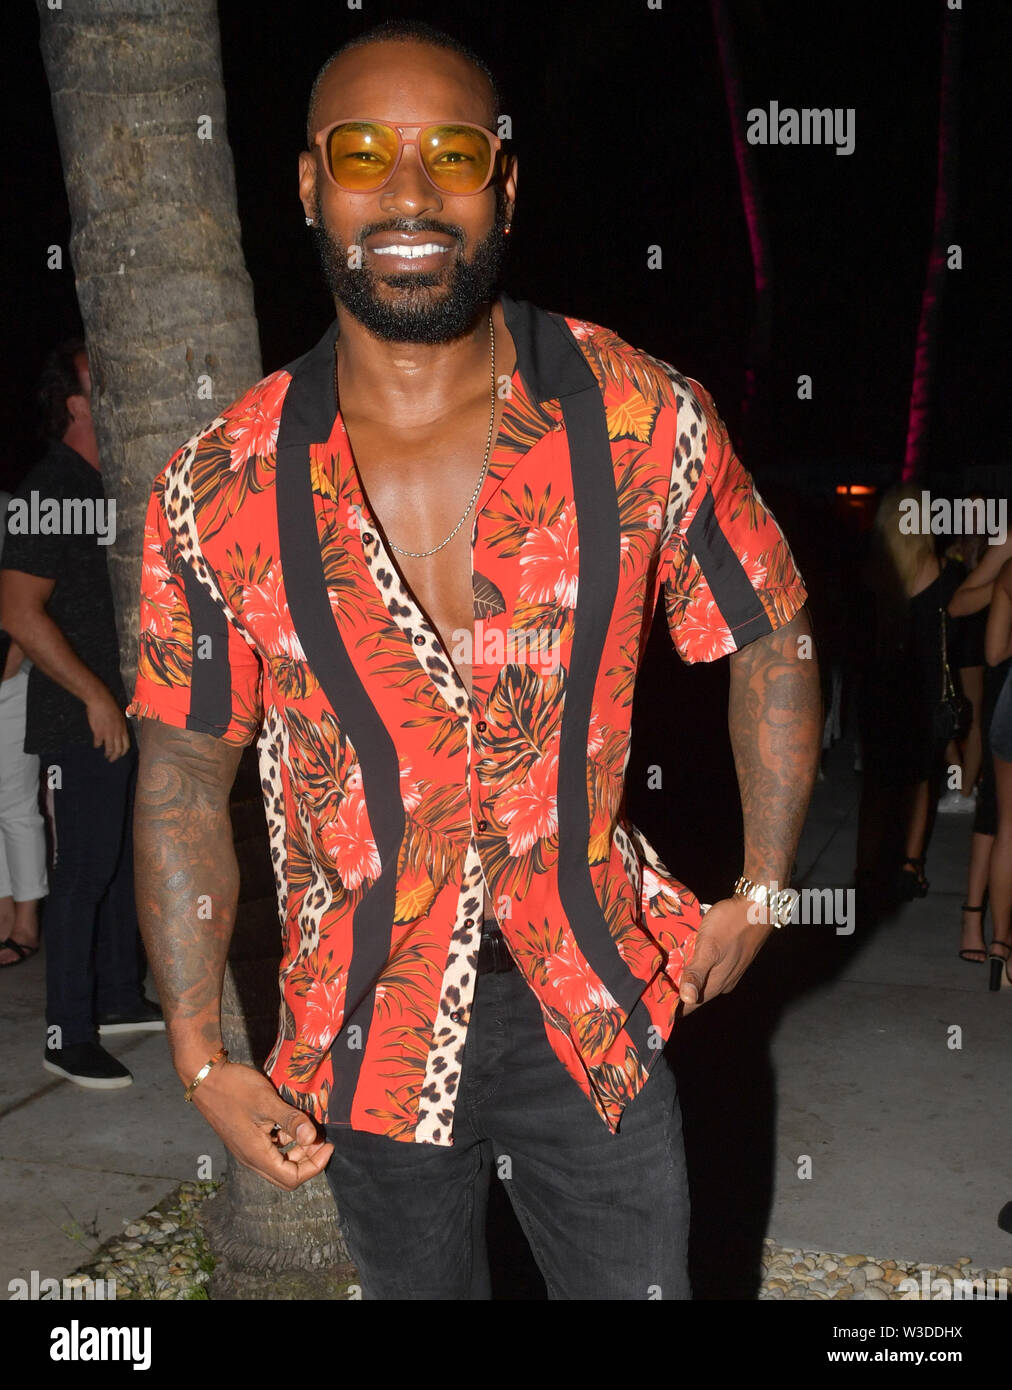 Miami Beach, Florida, USA. 14th July 2019. Ralph Lauren supermodel Tyson  Beckford attend the 2019 Sports Illustrated Swimsuit Runway Show During  Miami Swim Week At W South Beach - Red Carpet Arrivals